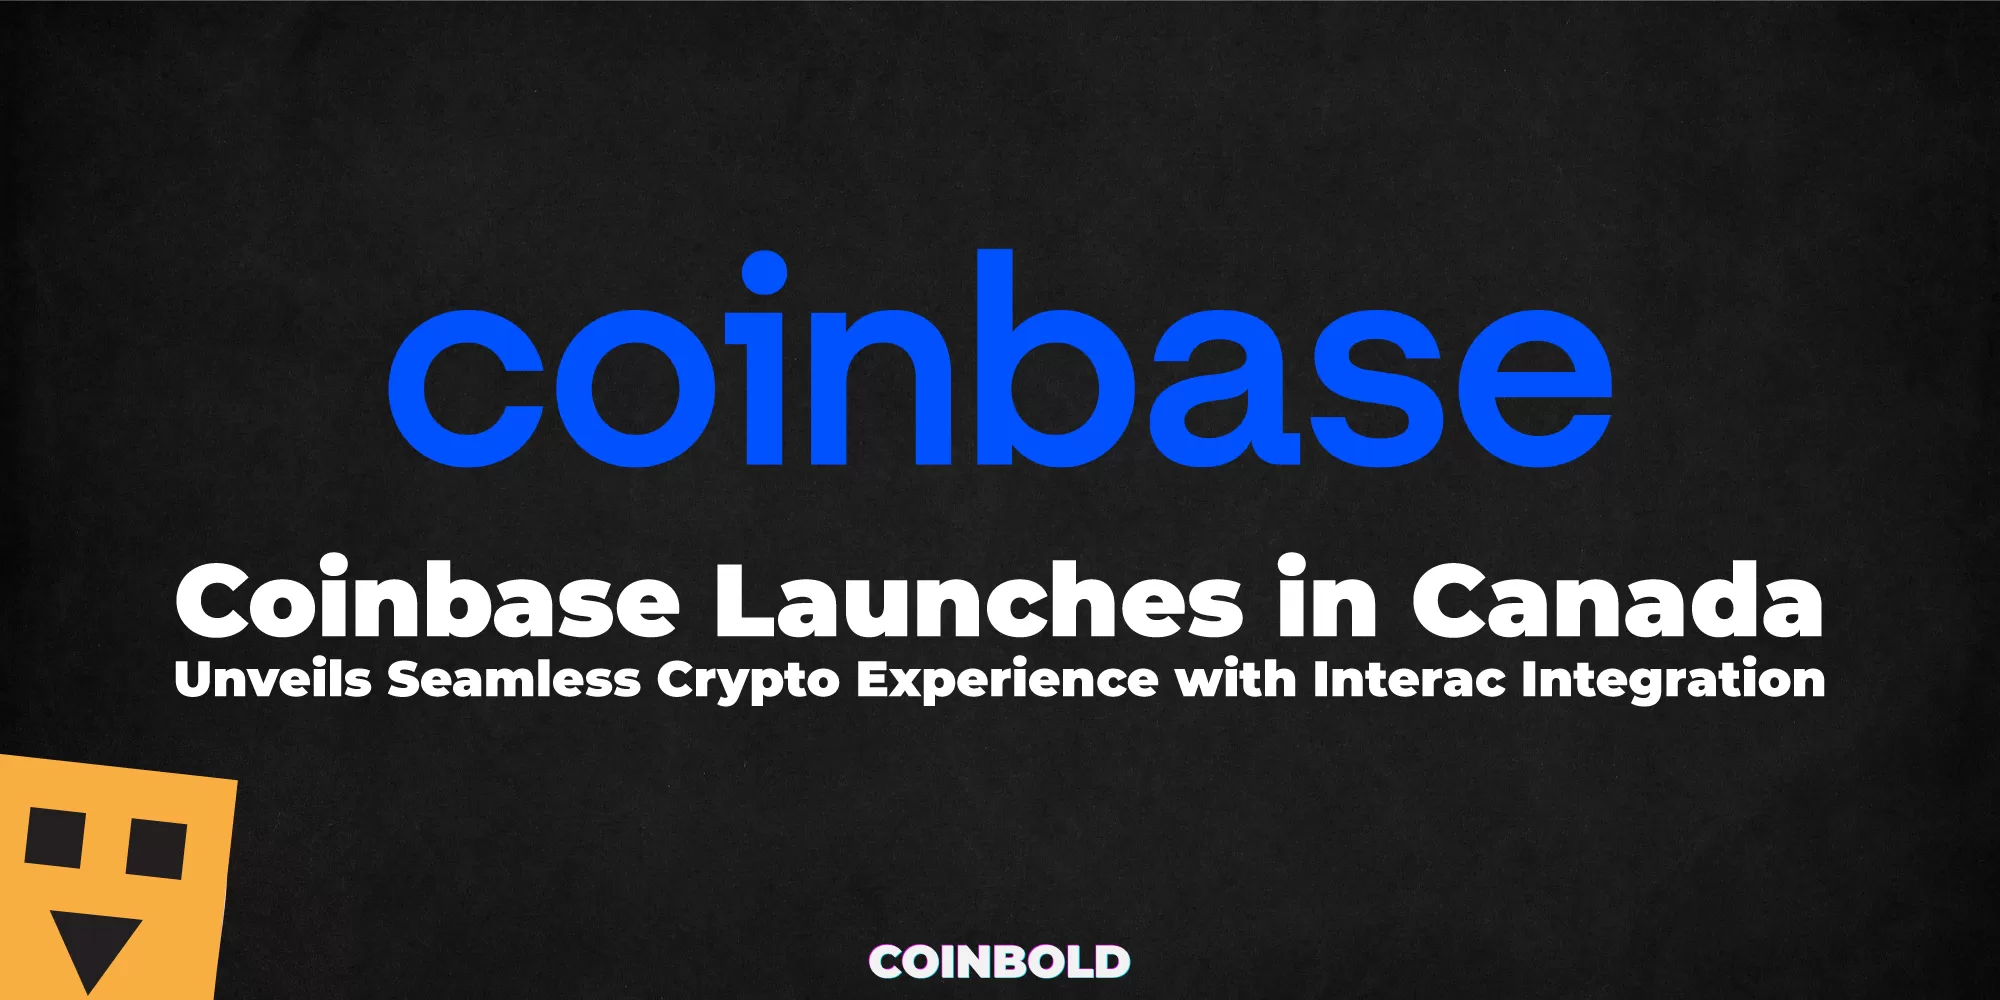 Coinbase Launches in Canada, Unveils Seamless Crypto Experience with Interac Integration